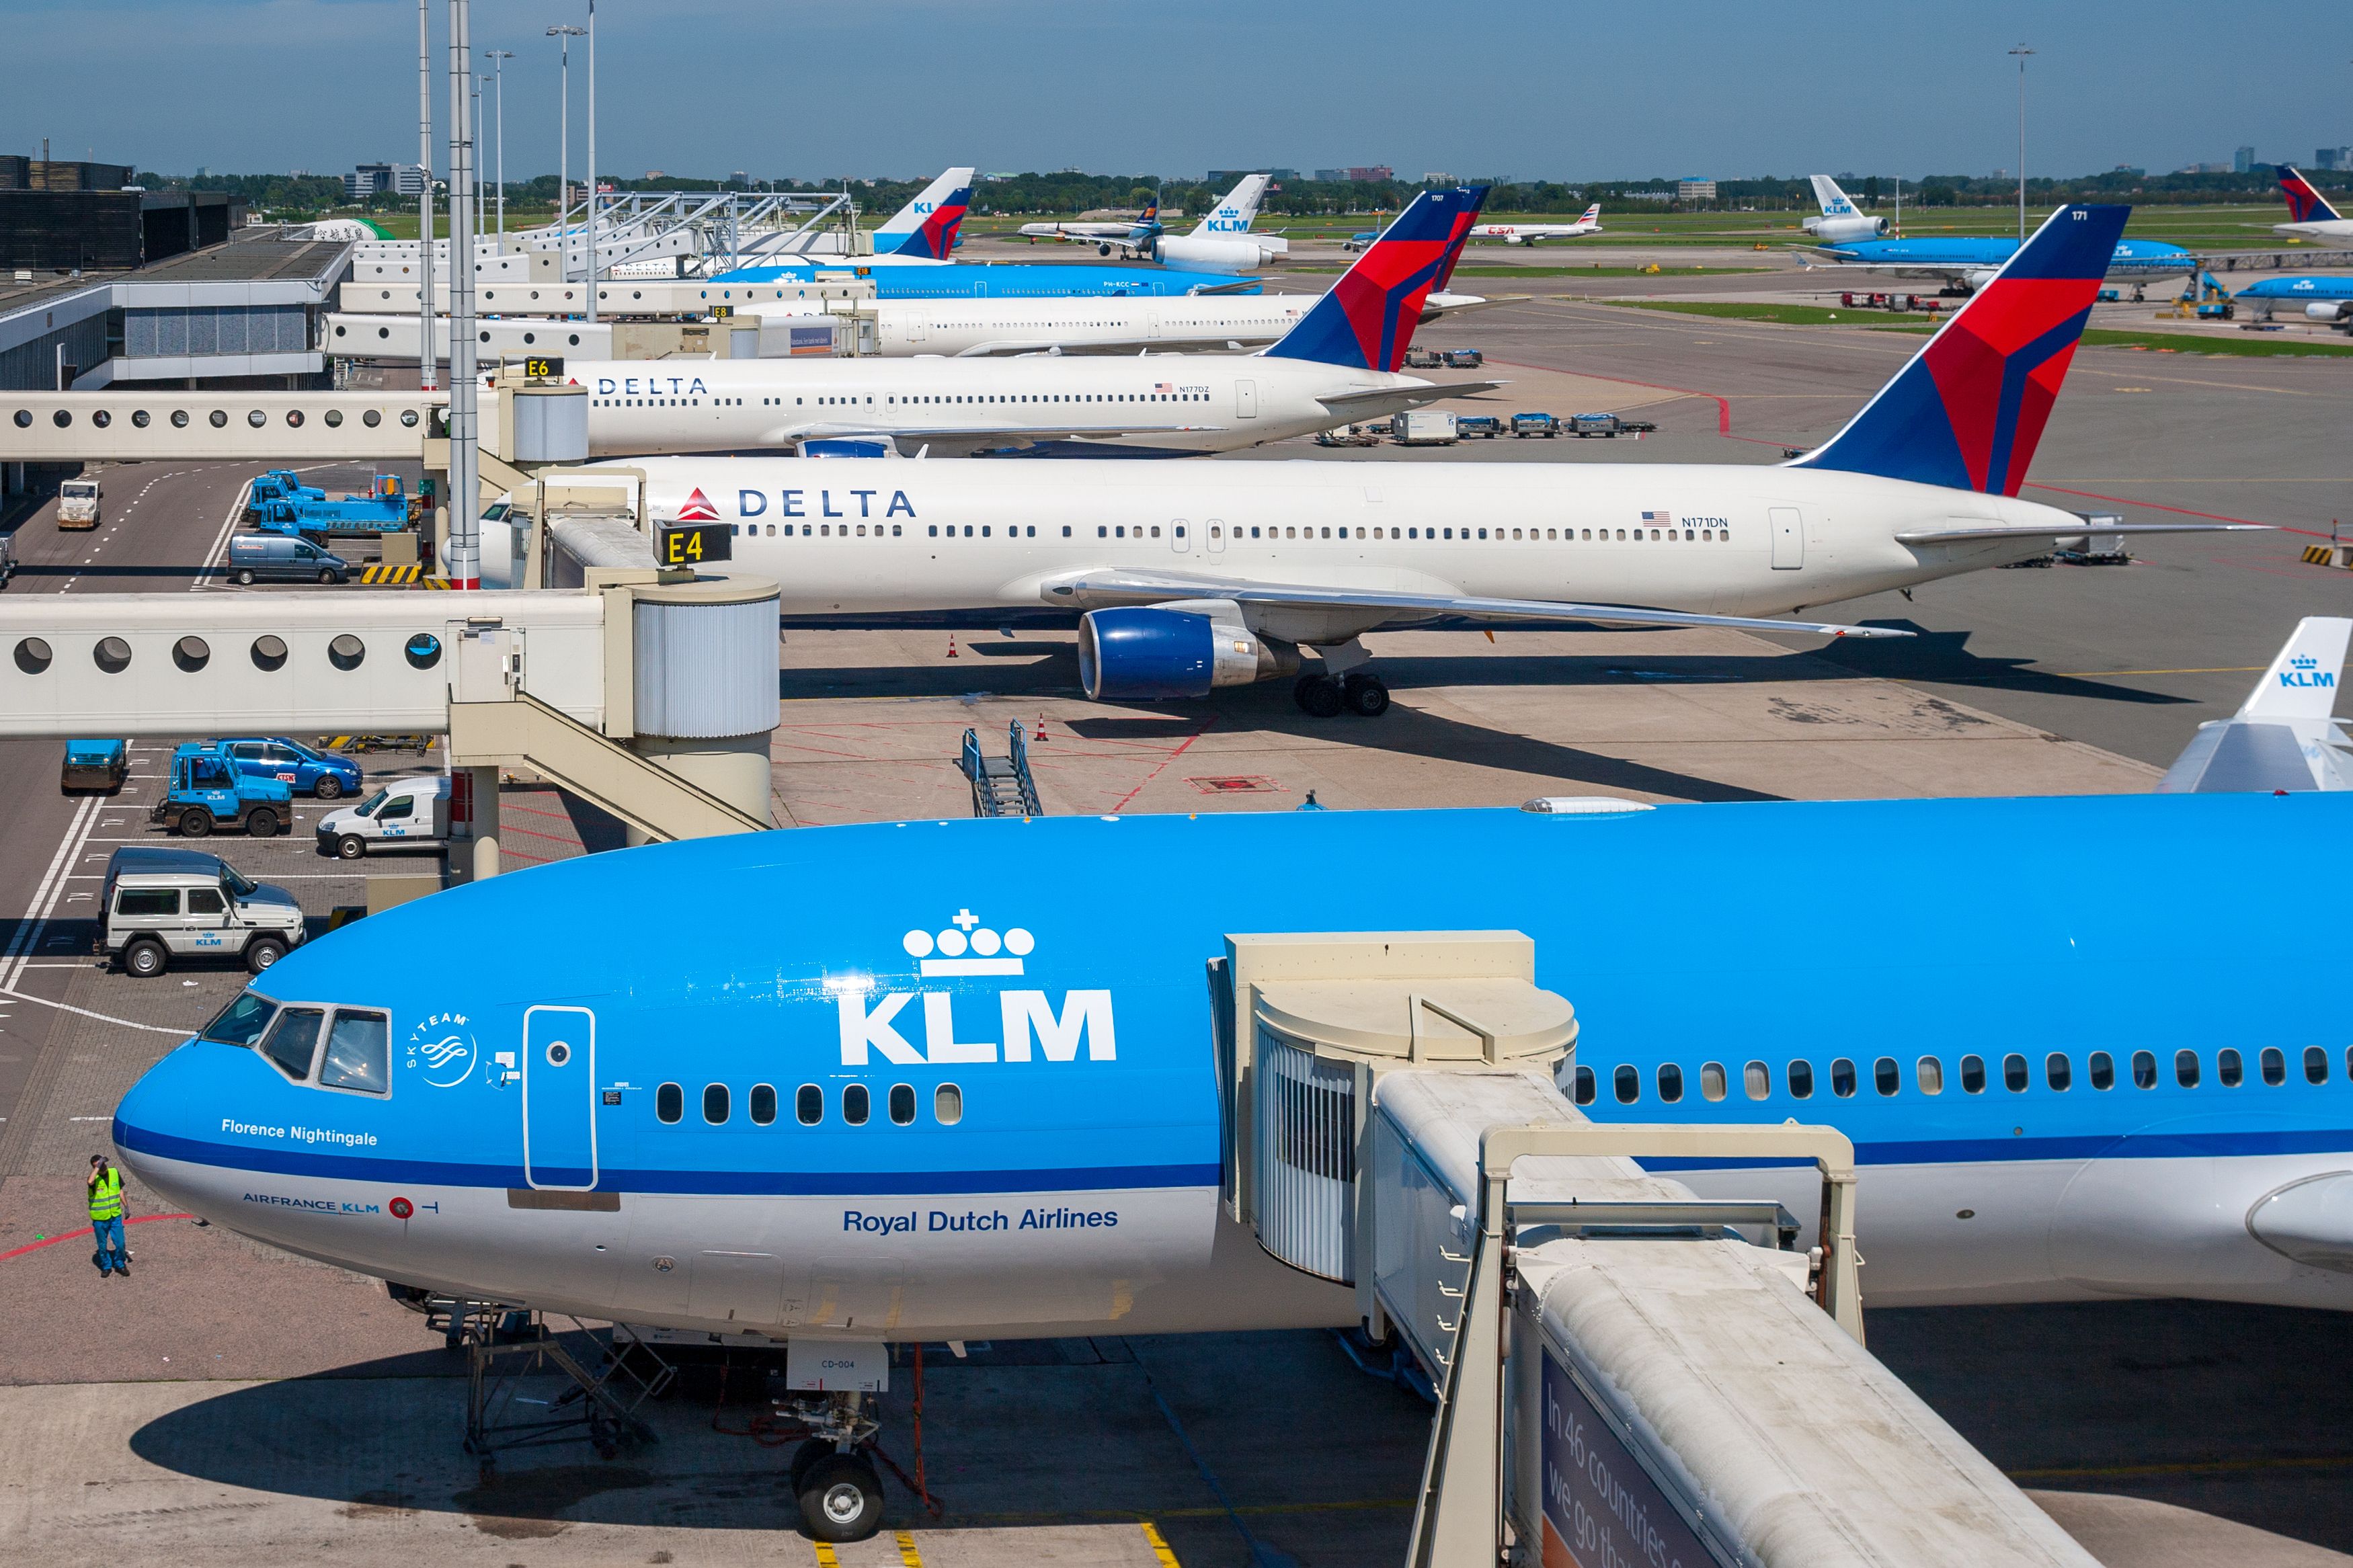 Delta and KLM planes at Amsterdam Airport